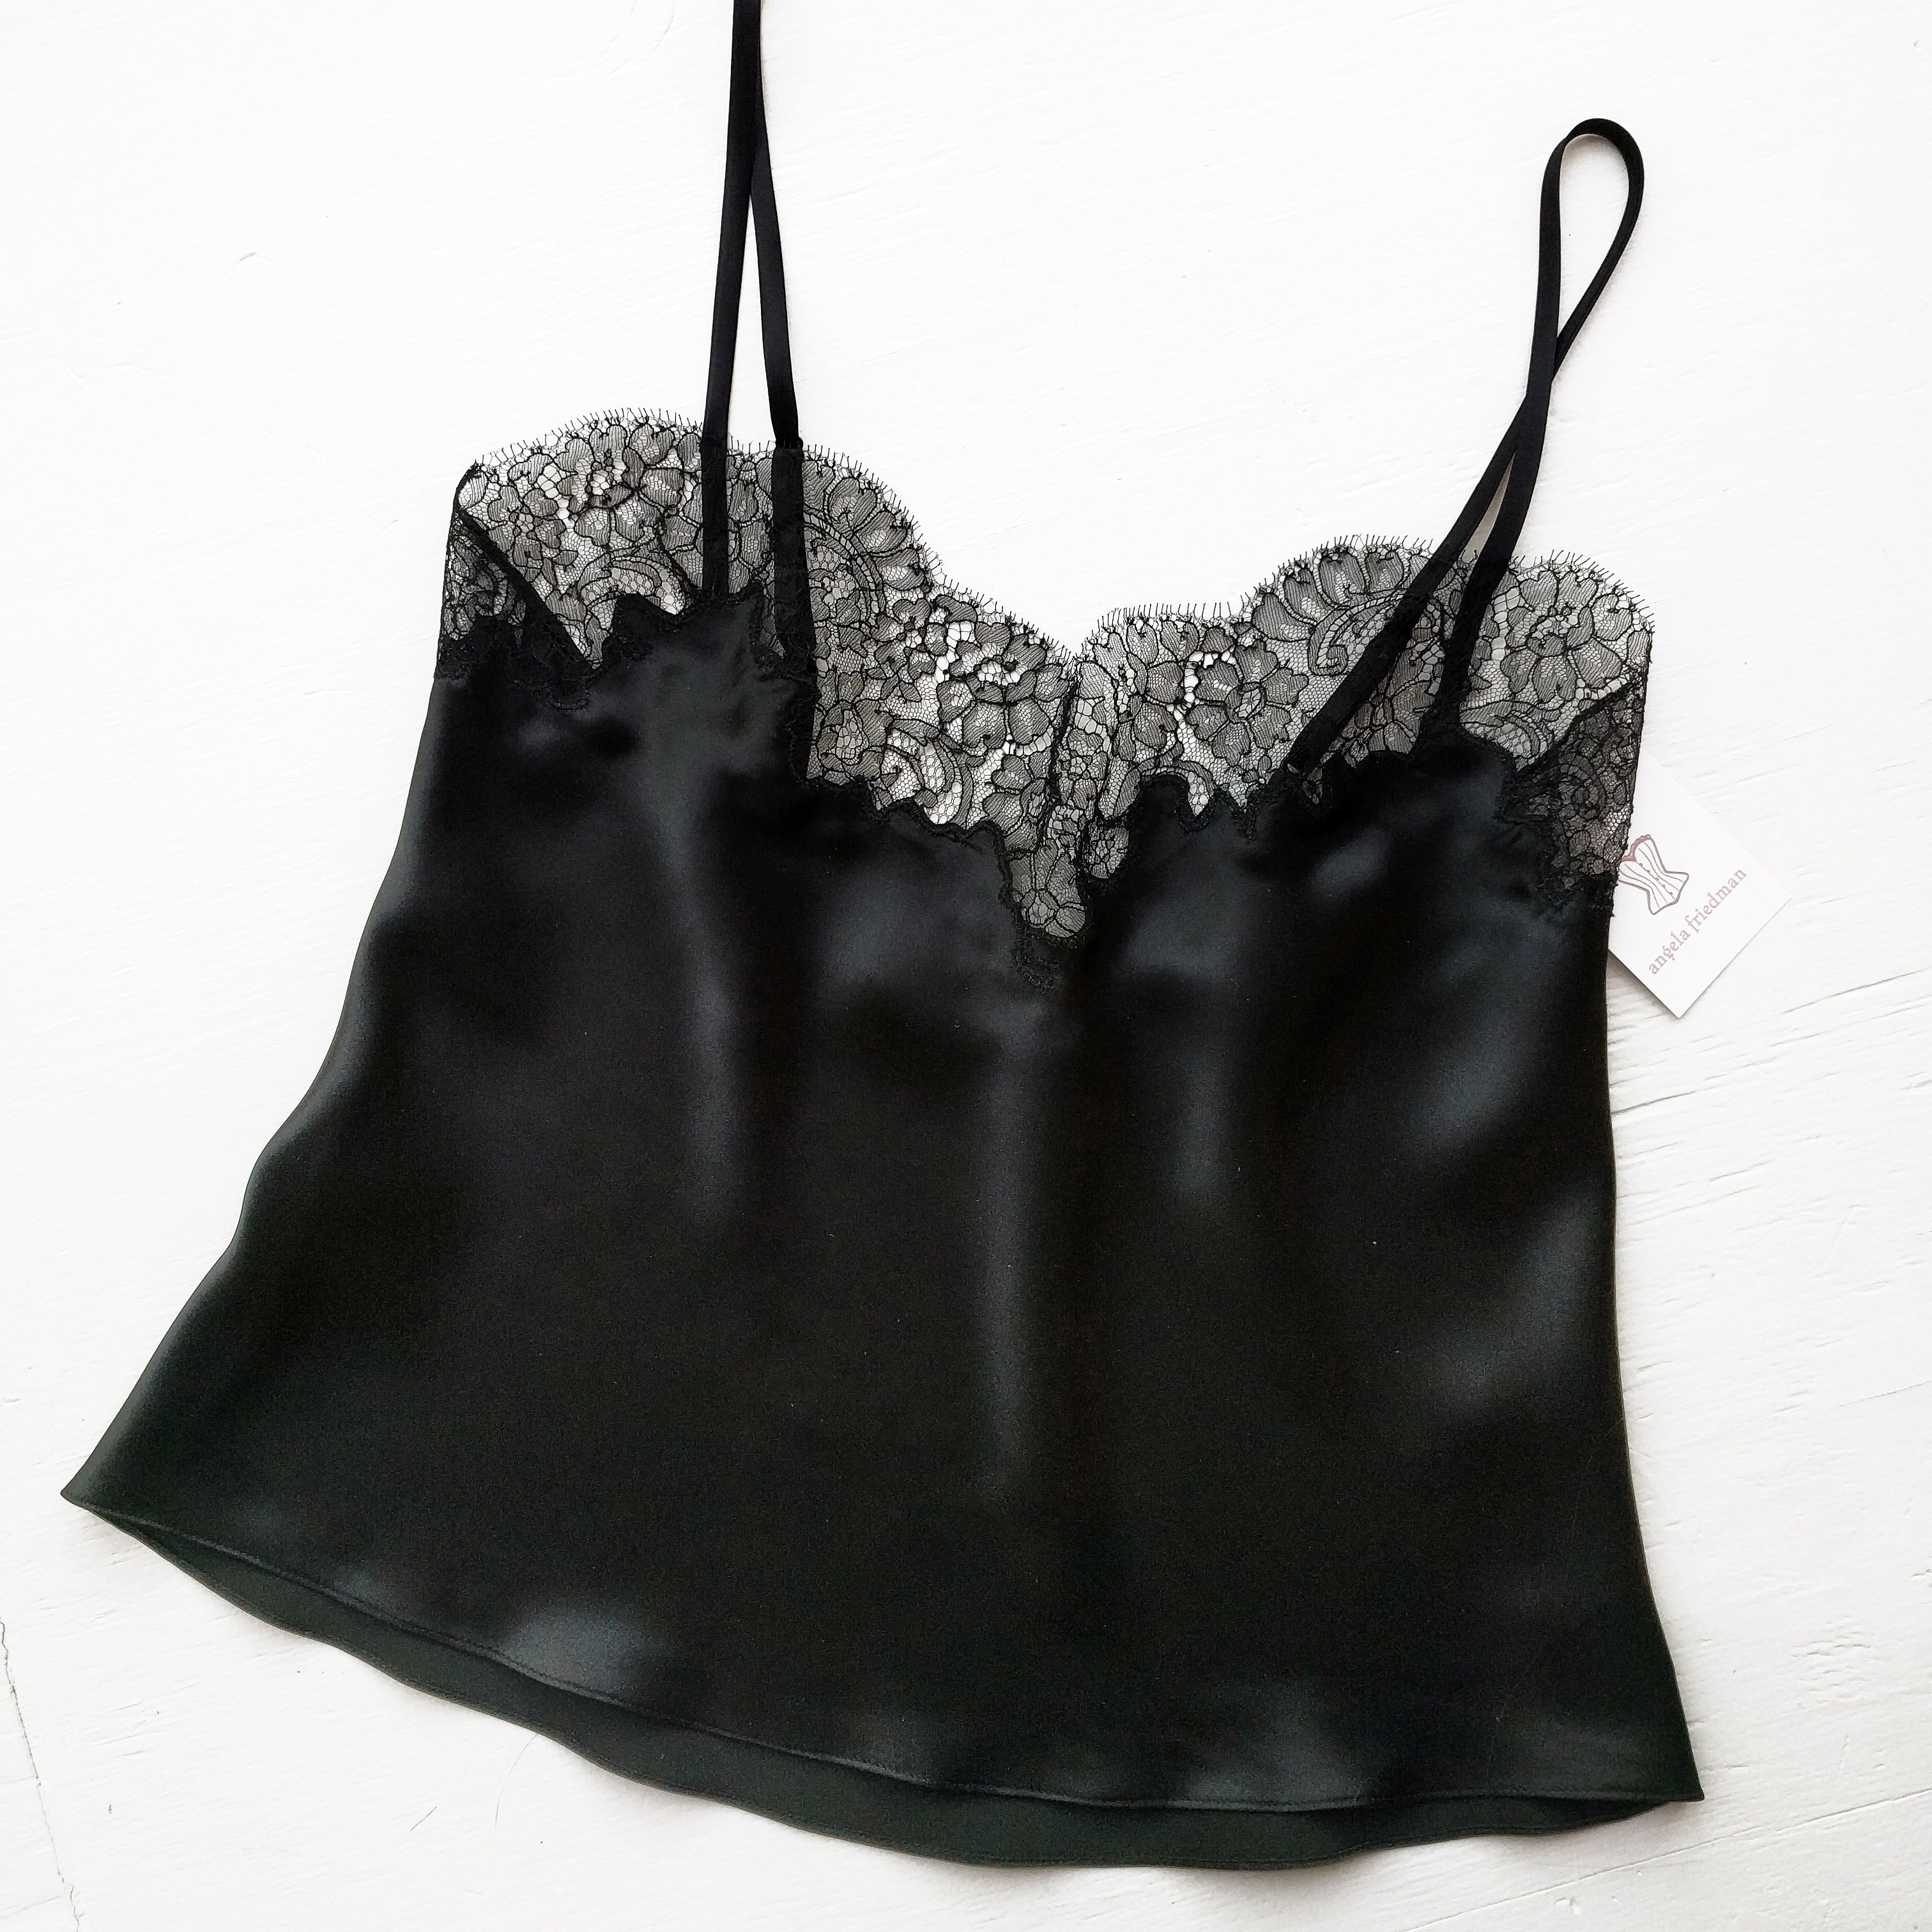 Black silk satin camisole with luxury french lace applique trim